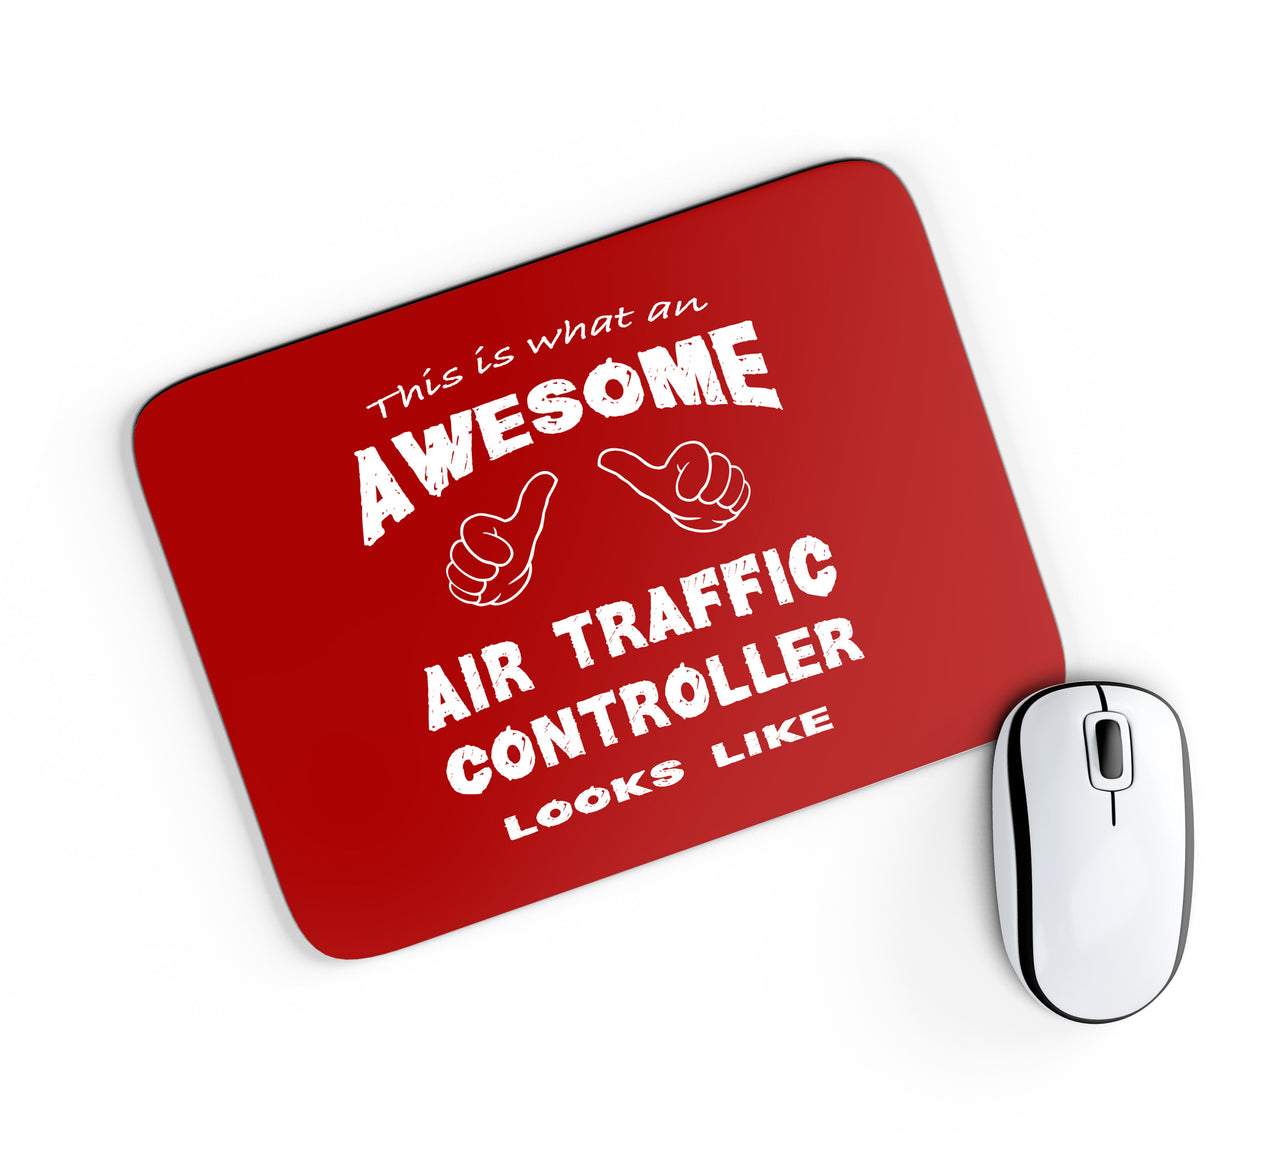 Air Traffic Controller Designed Mouse Pads